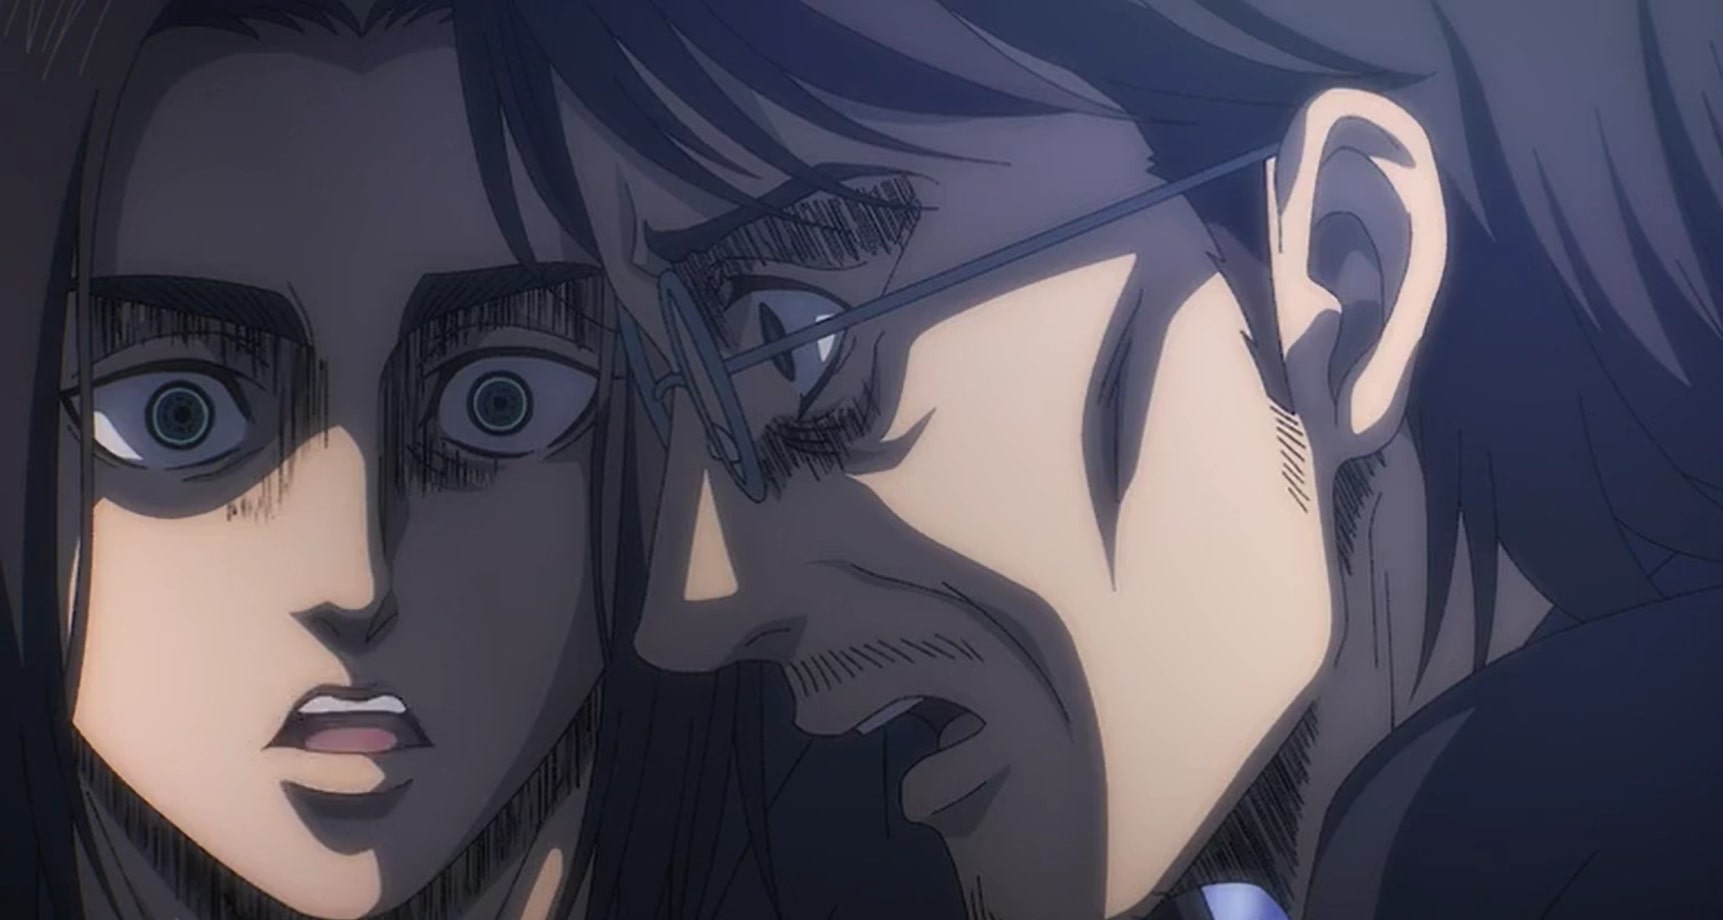 Why Did Grisha Yaeger Kill the Reiss Family in Attack on Titan?